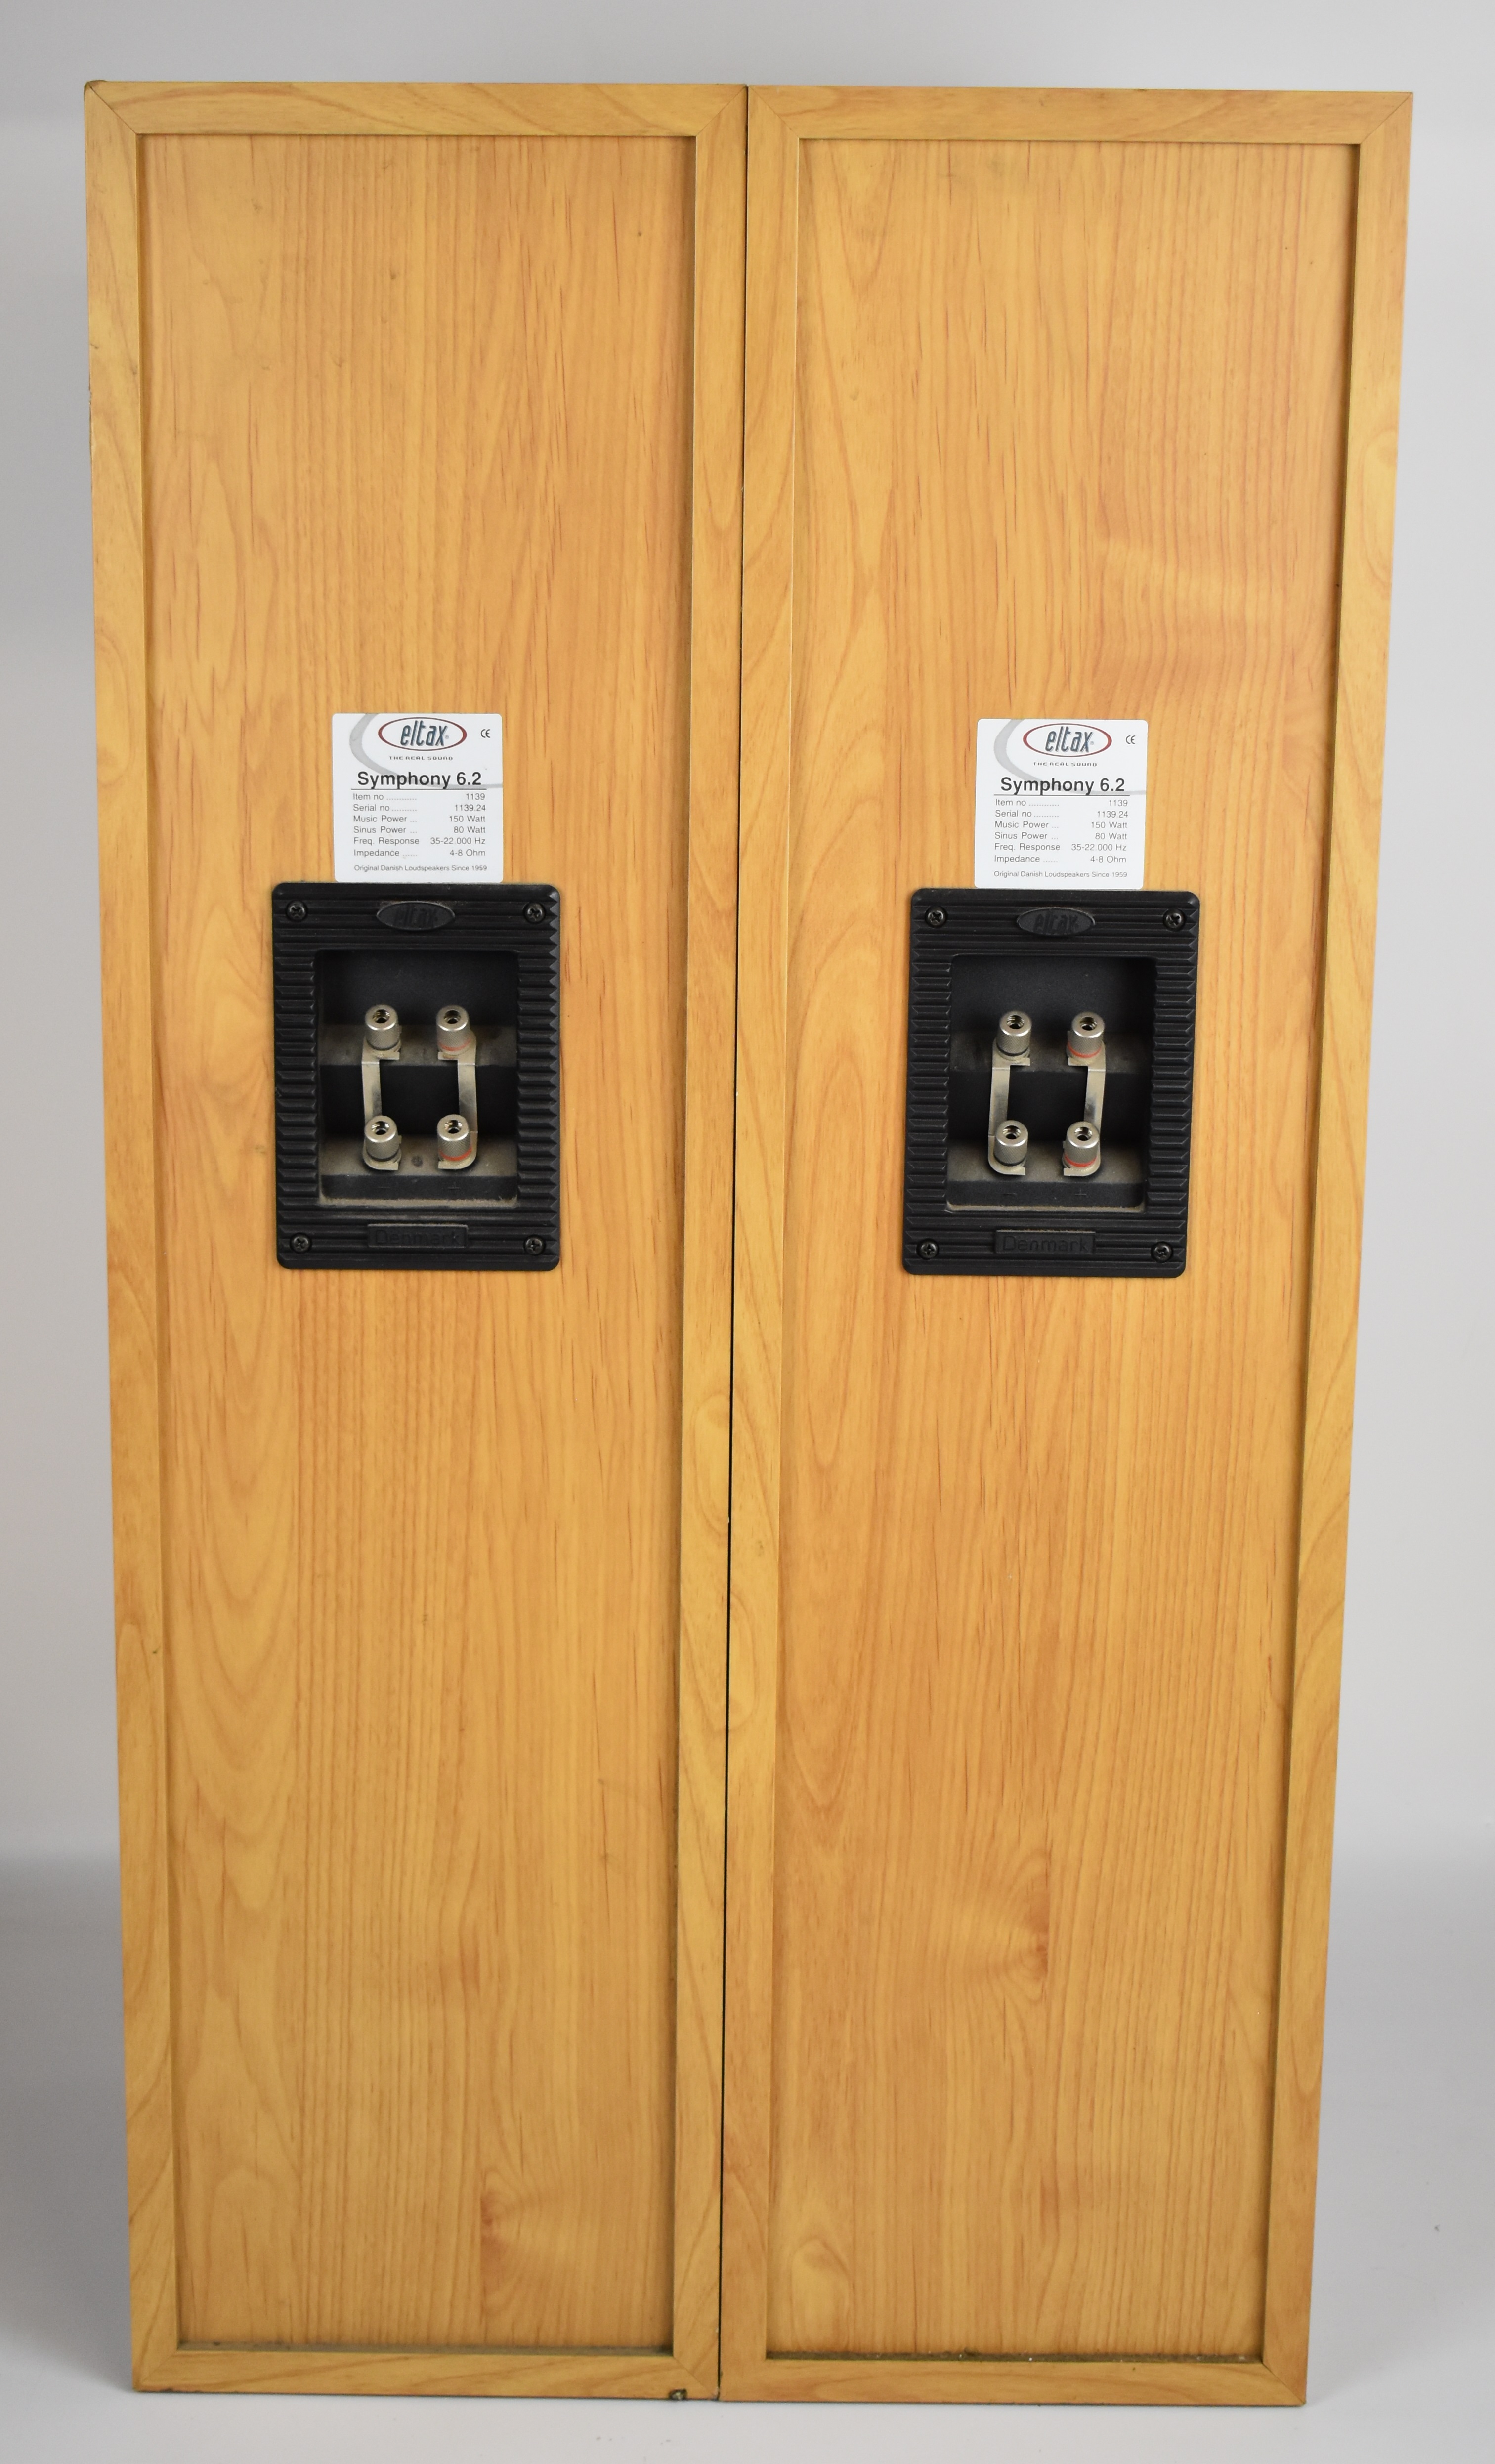 Pair of Eltax Symphony 6.2 stereo speakers, height 84cm - Image 3 of 4